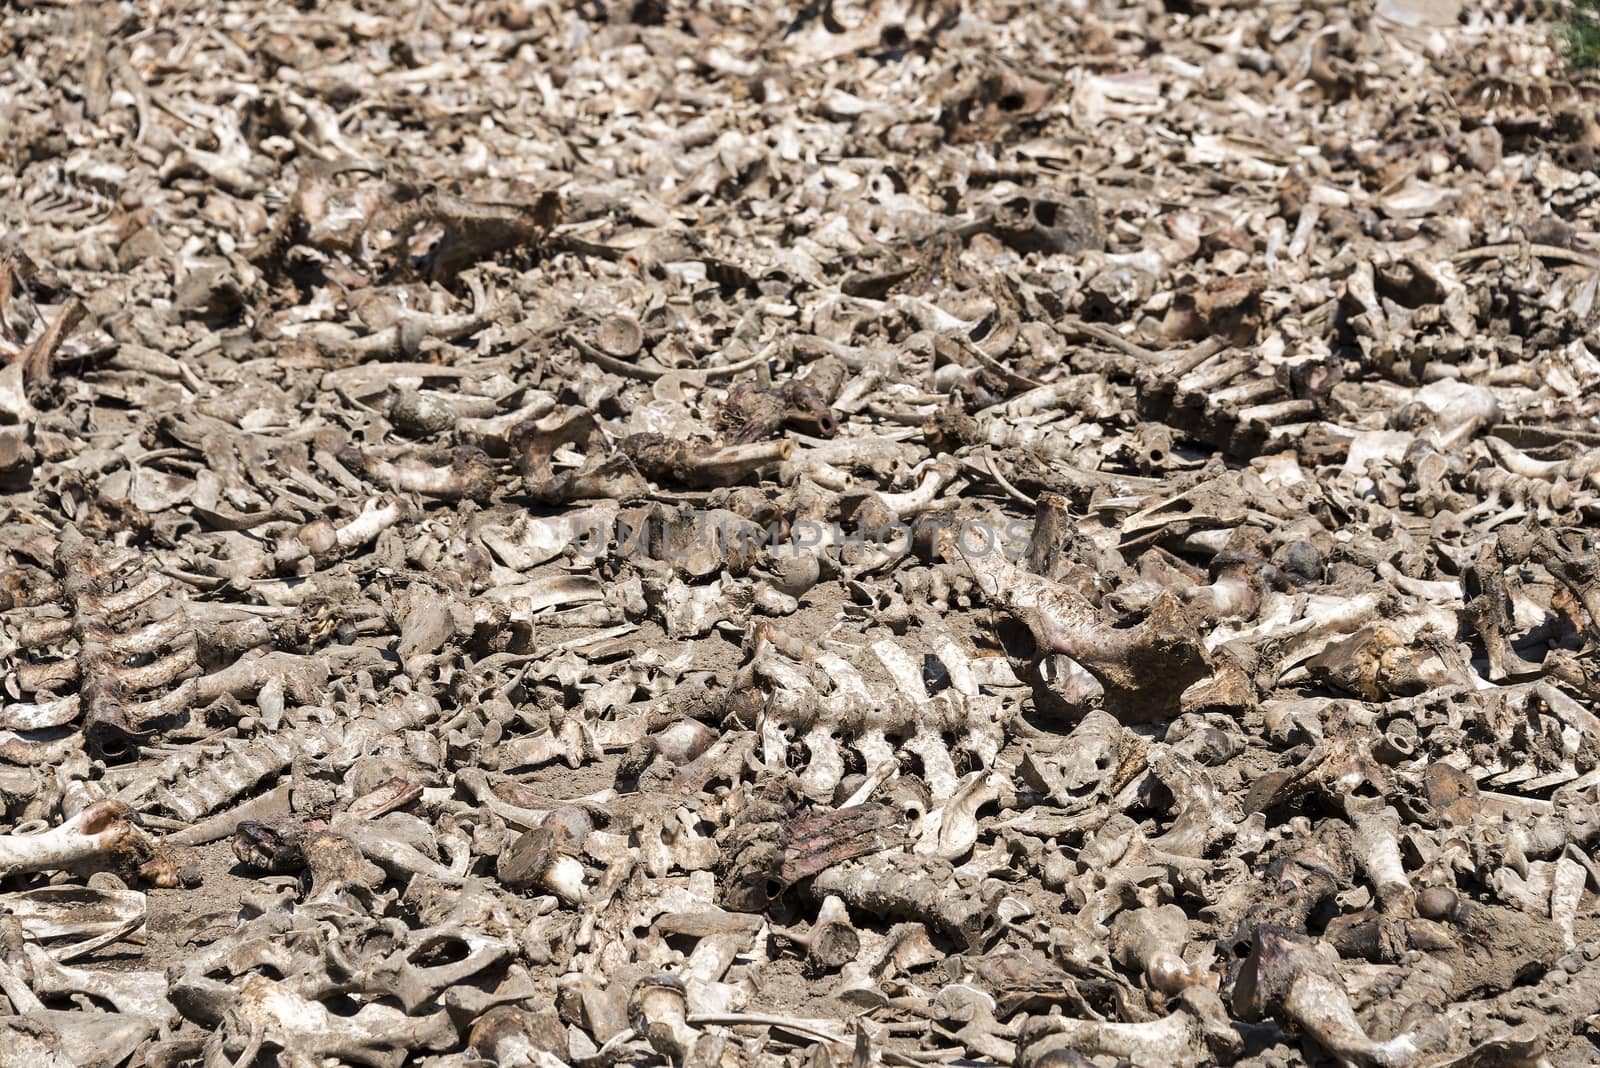 all dead animal bones by compuinfoto